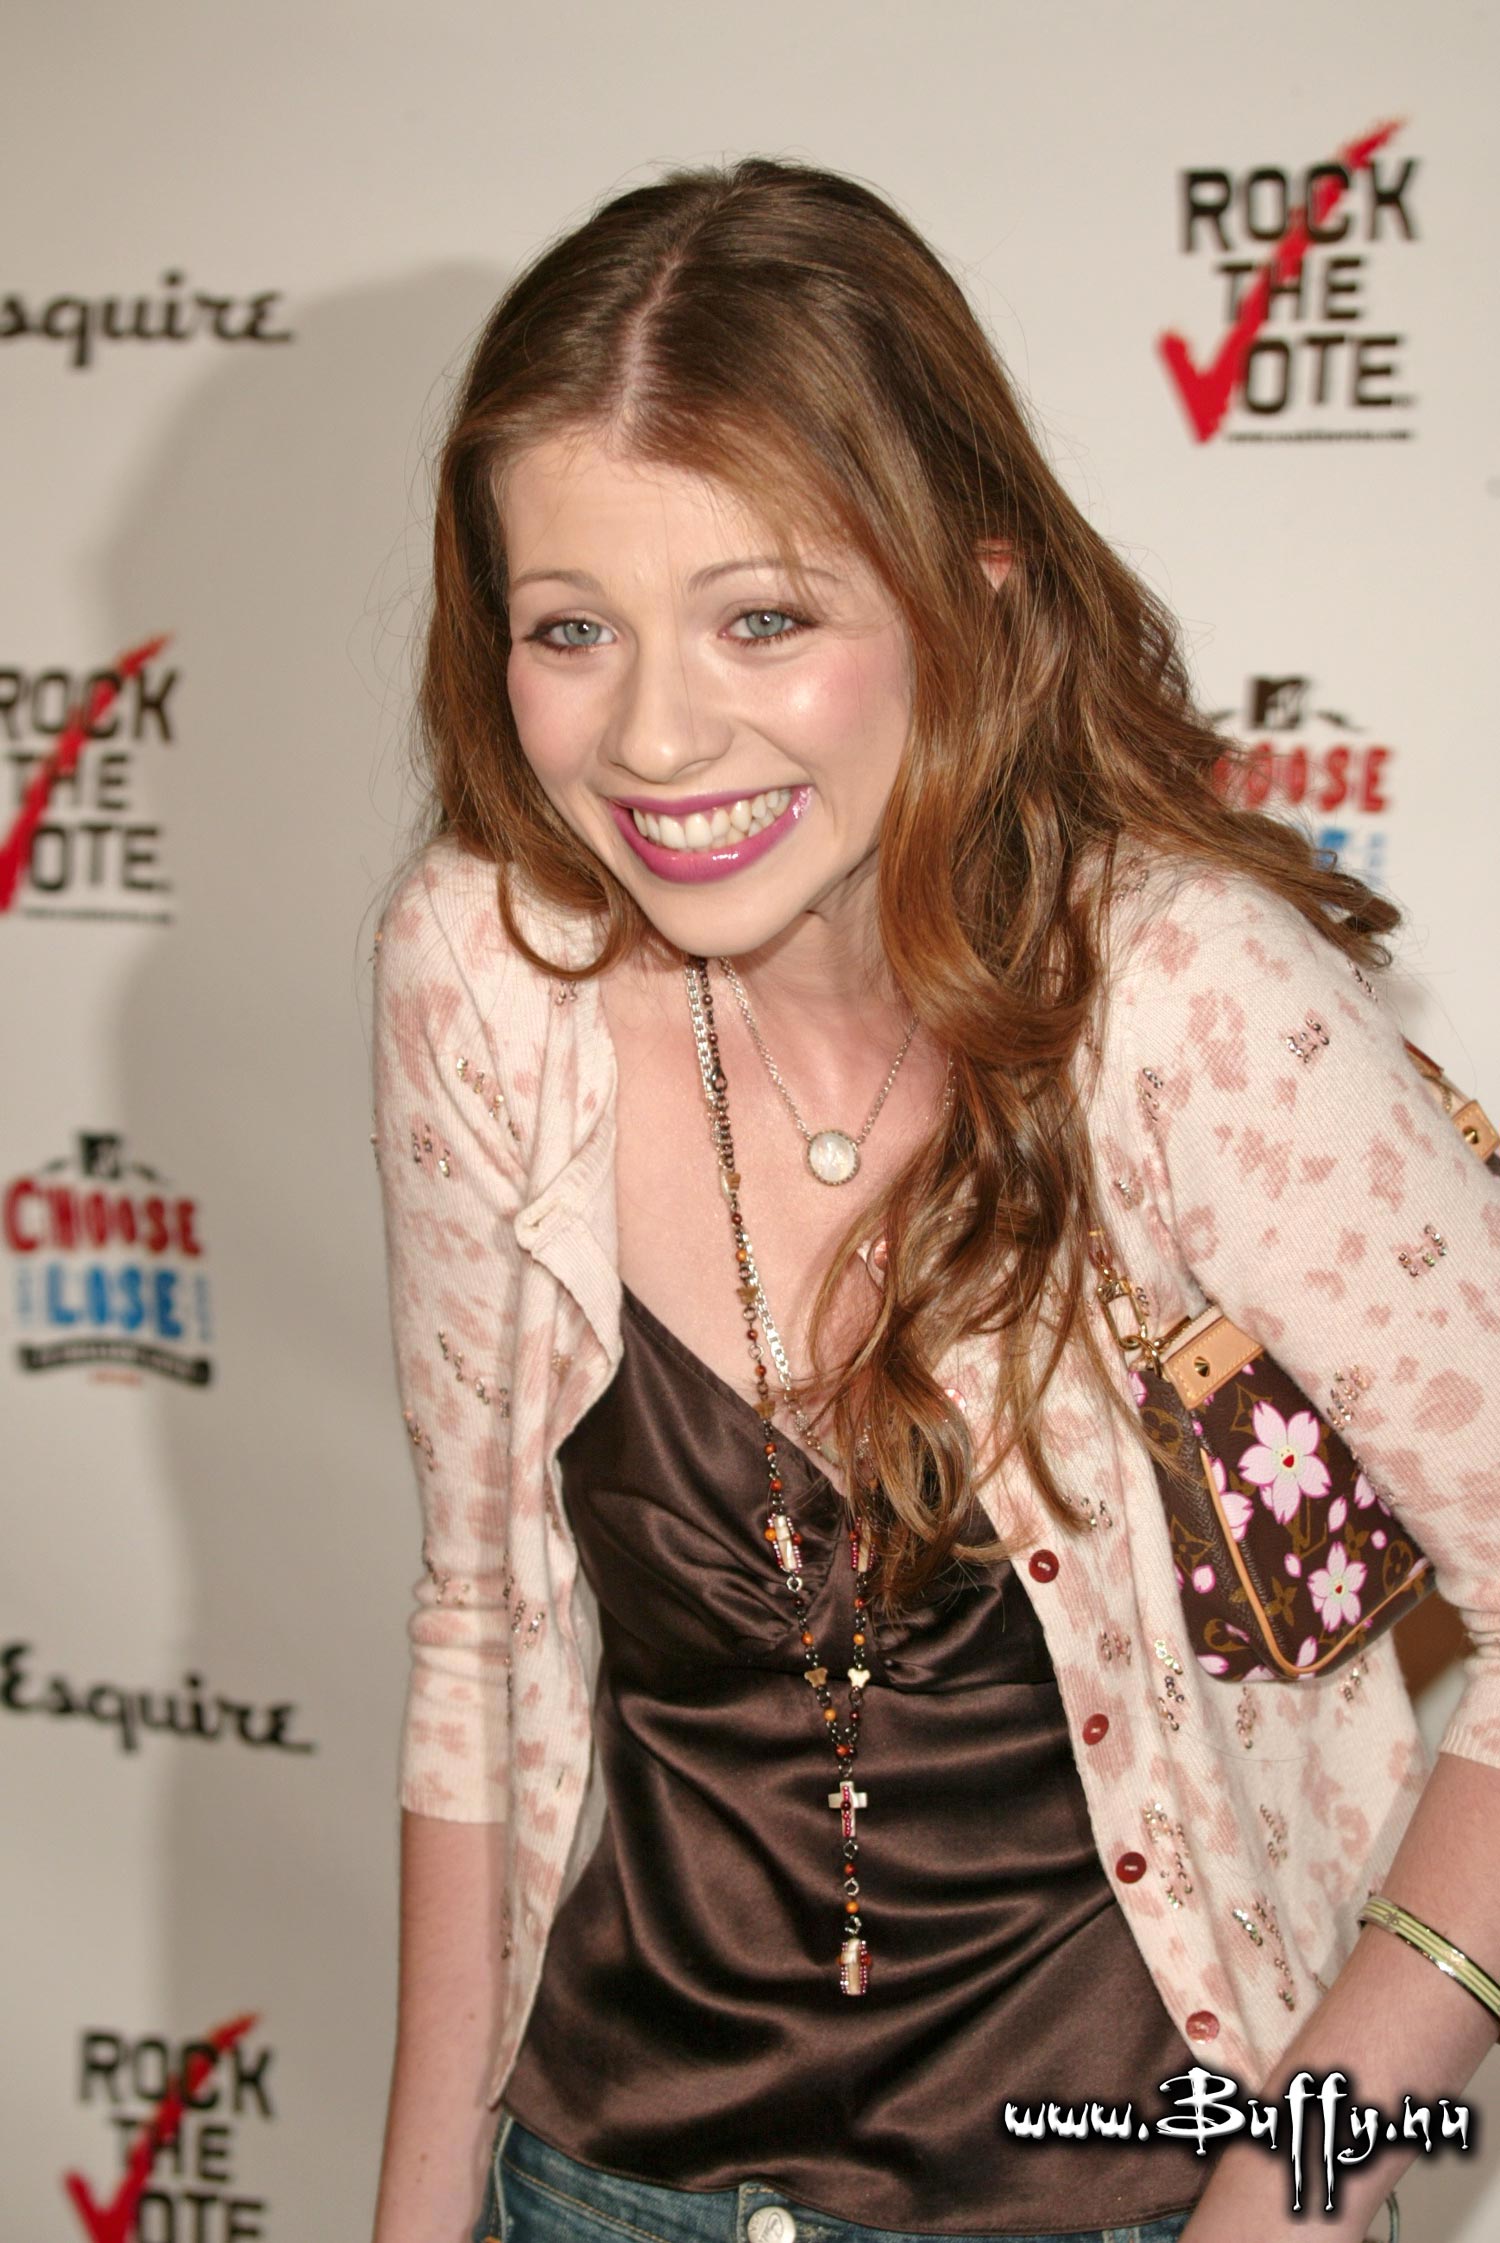 michelle-trachtenberg-young-hollywood-votes-party-hq-04-1500.jpg